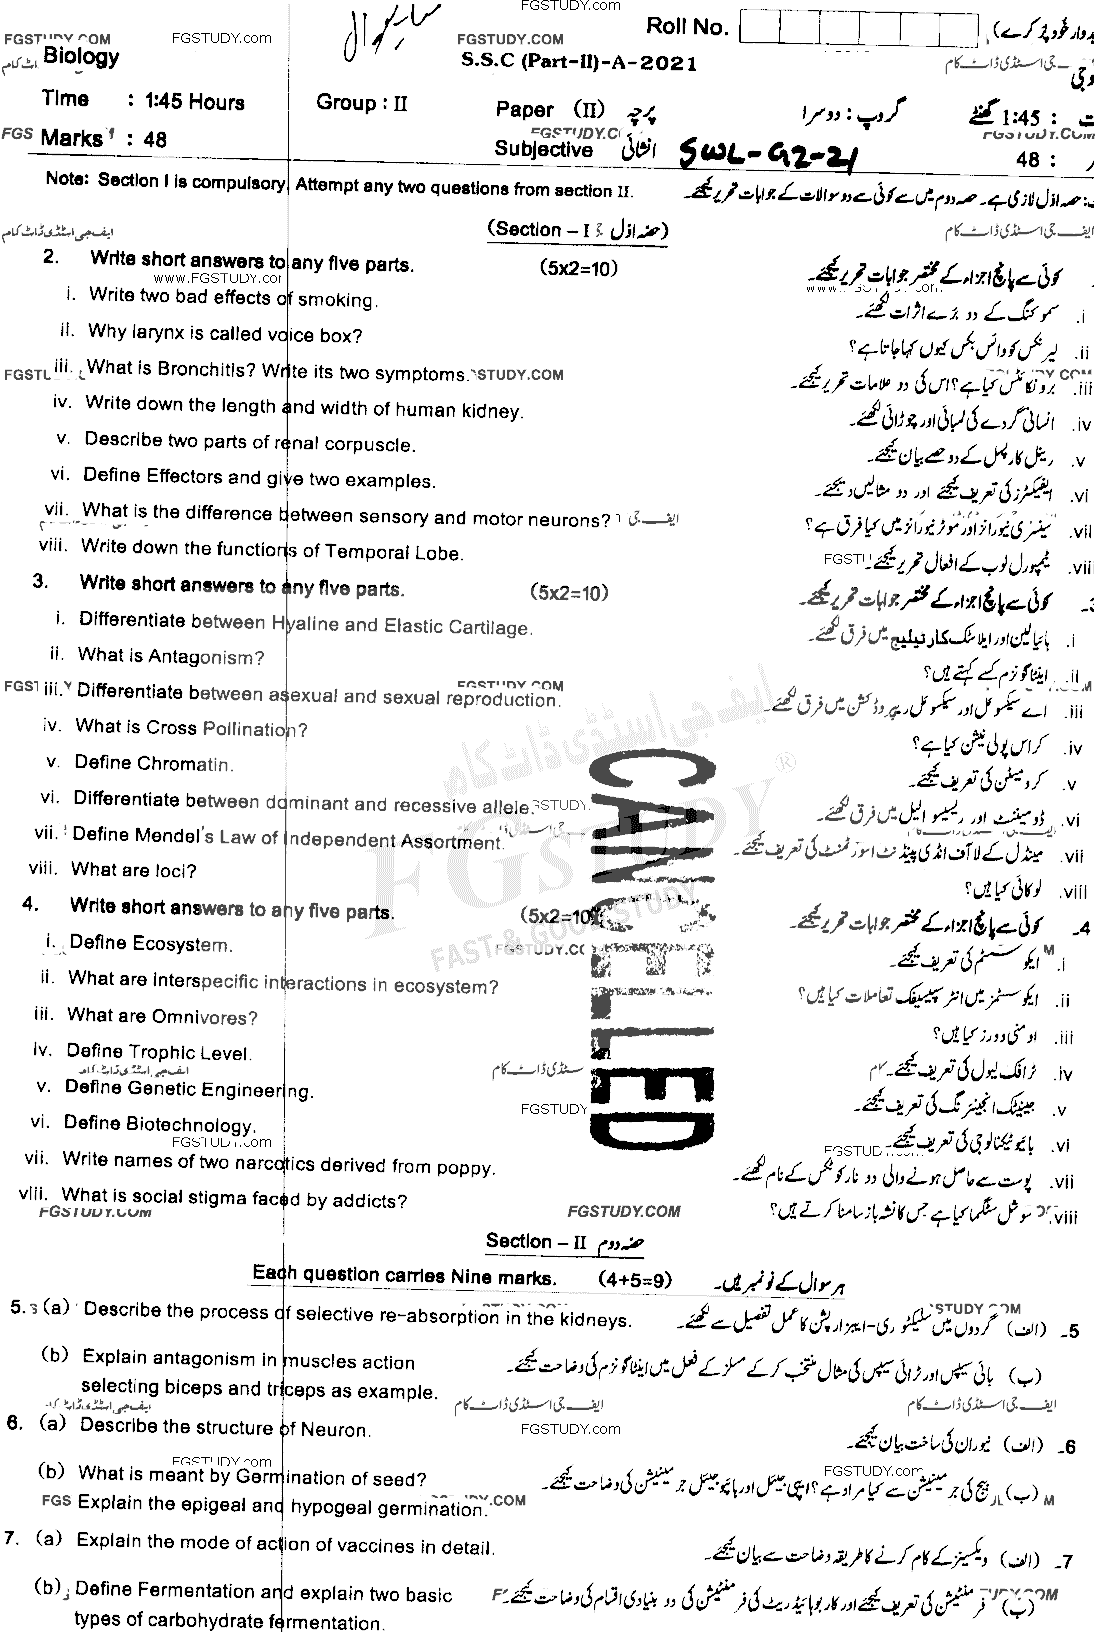 10th Class Biology Past Paper 2021 Sahiwal Board Group 2 Subjective